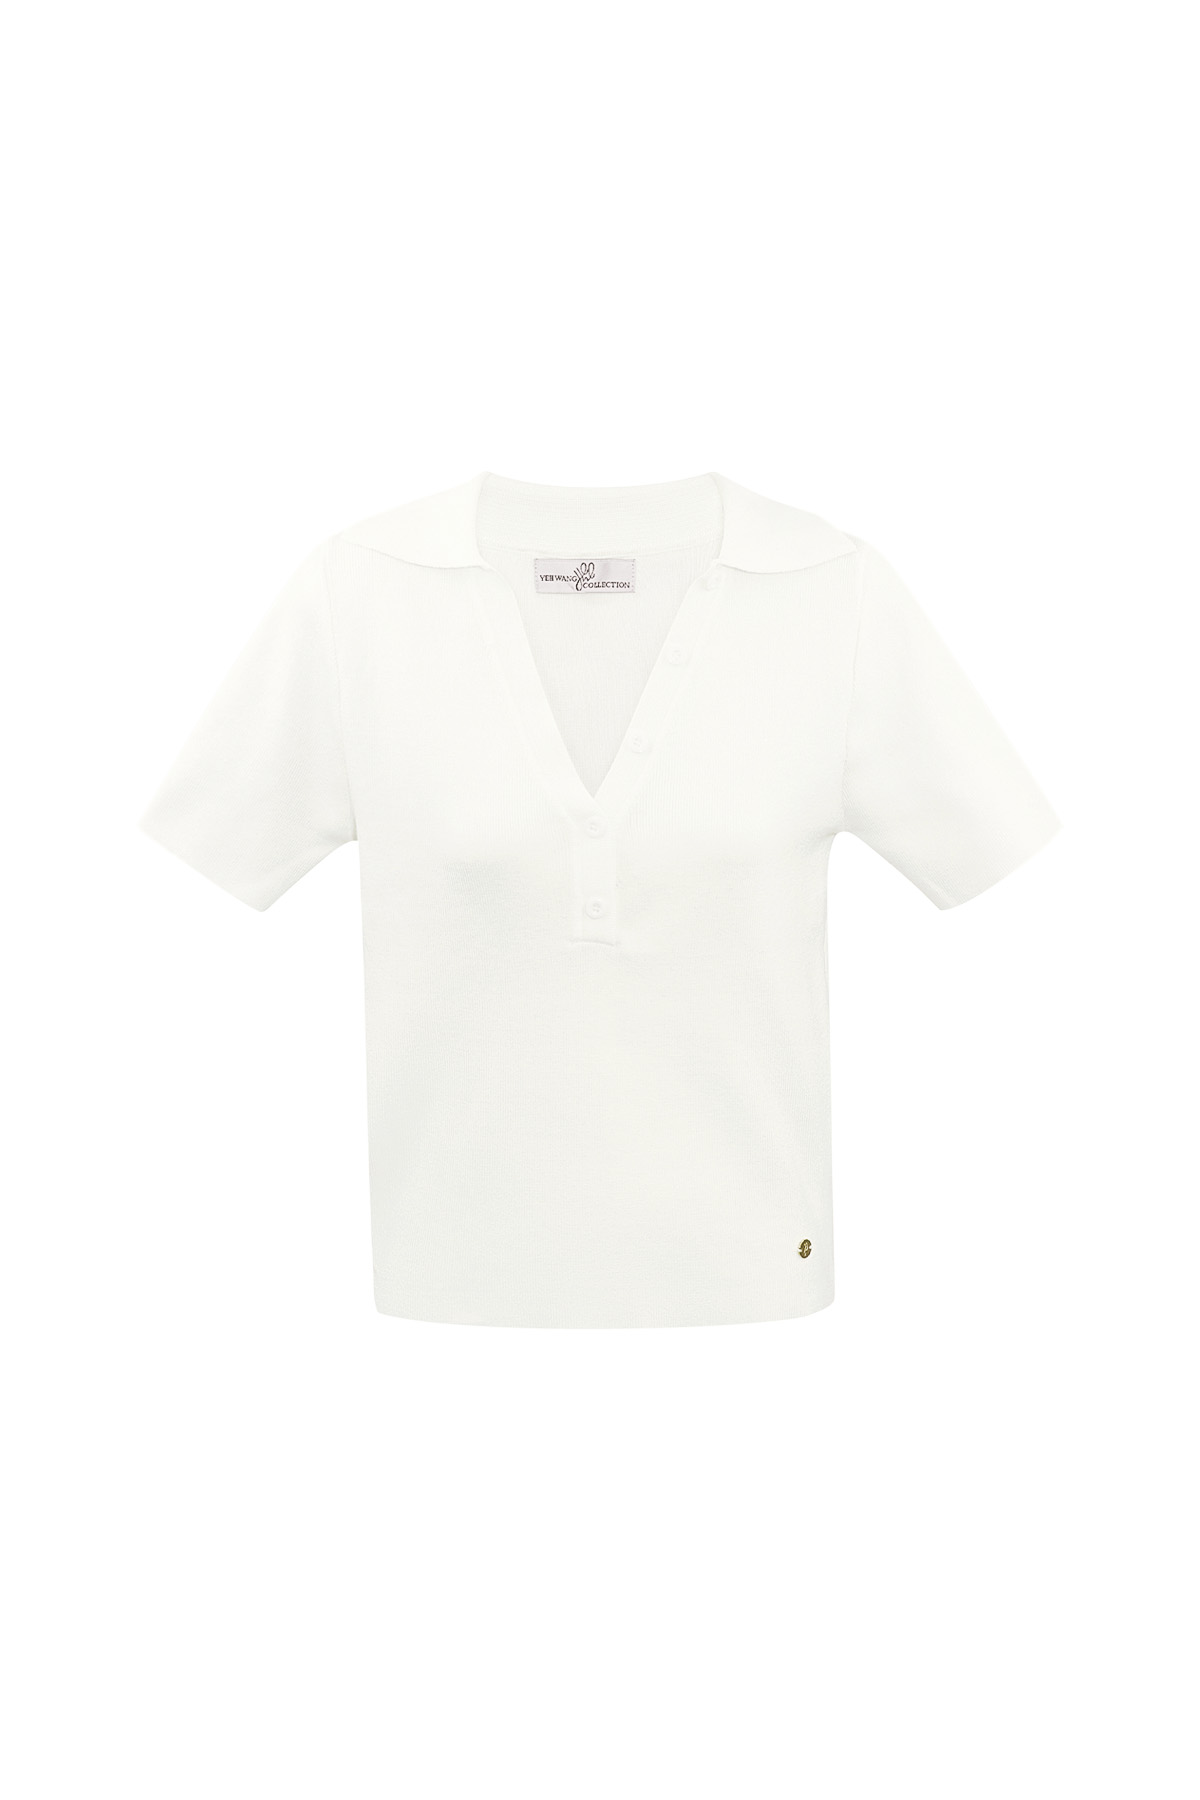 Polo half button-up large/extra large – white h5 